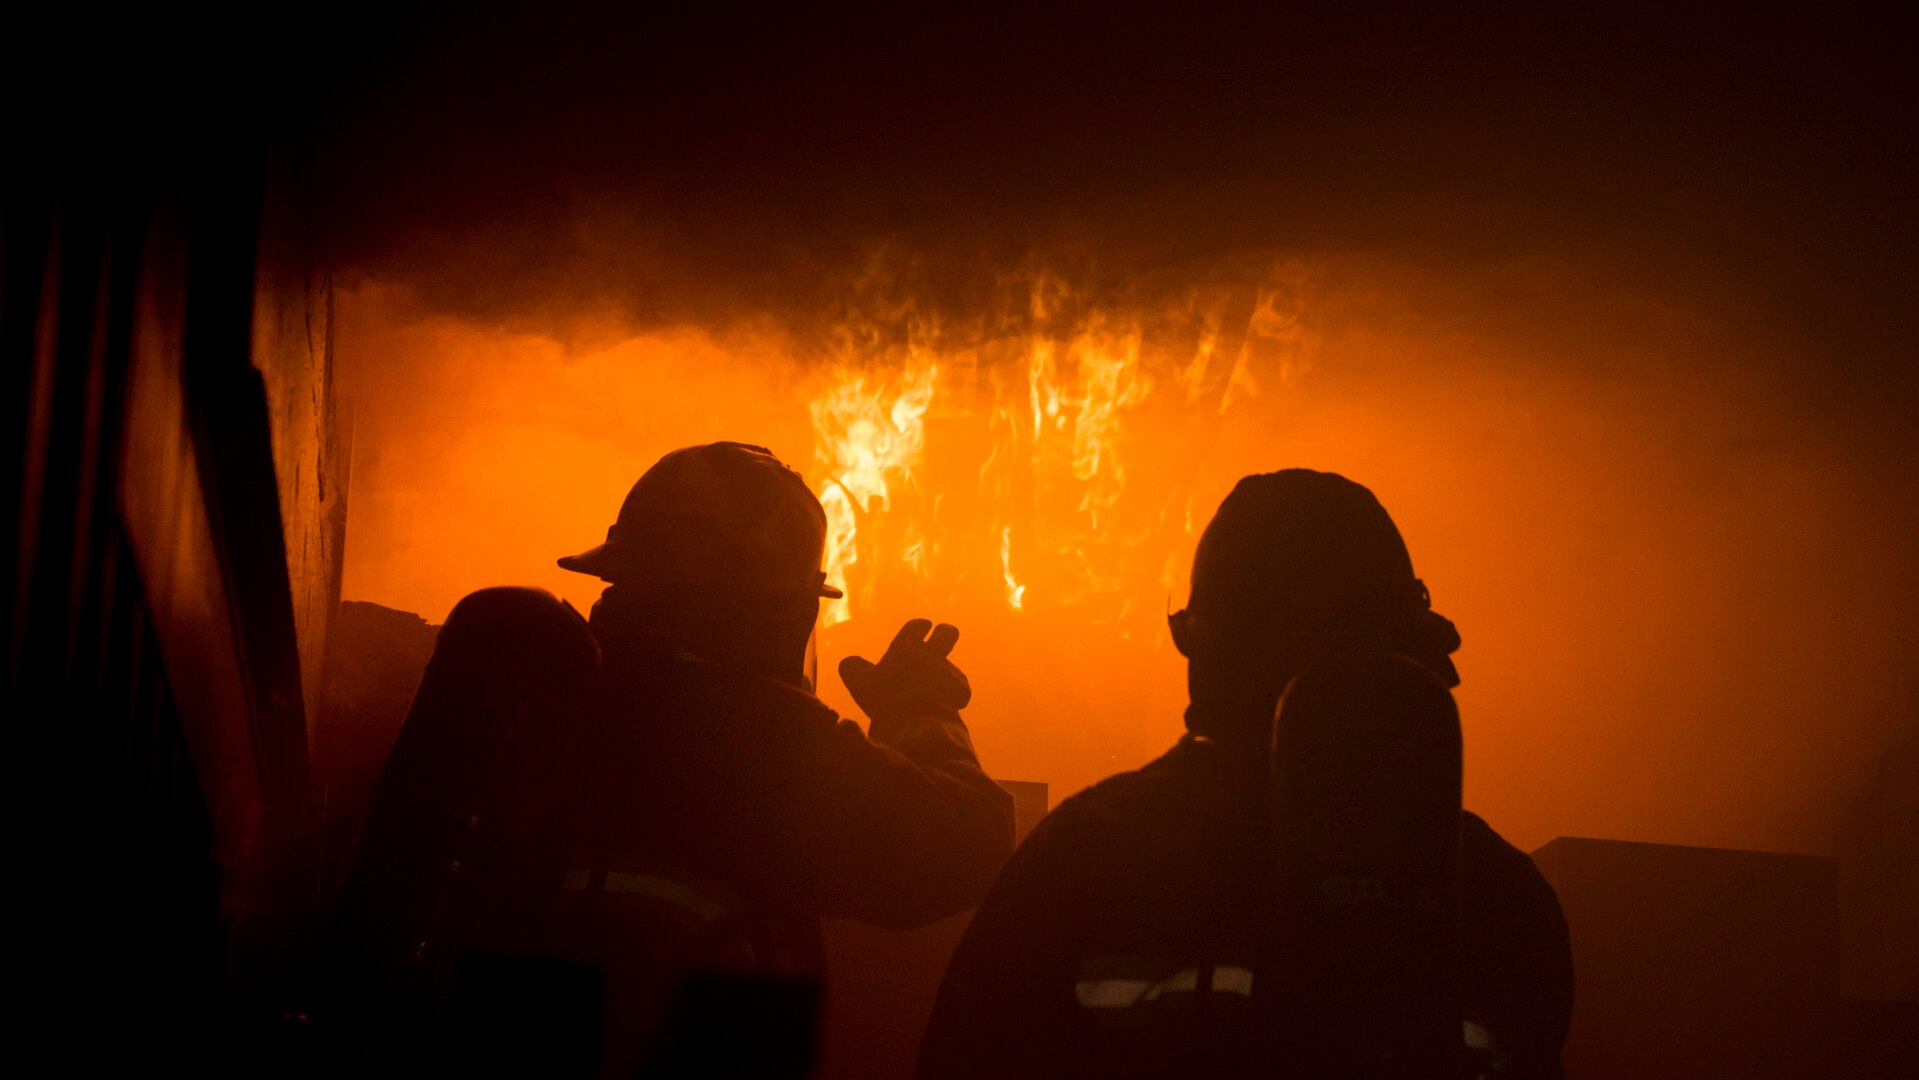 Staff Sgt. Jack Simonds, a firefighter with the Gowen Field Fire Department, instructs a fellow Gowen Field firefighter how to recognize the signs of flashover during training in a specialized mobile burn trailer, Gowen Field, Boise, Idaho, Sept. 13, 2019.